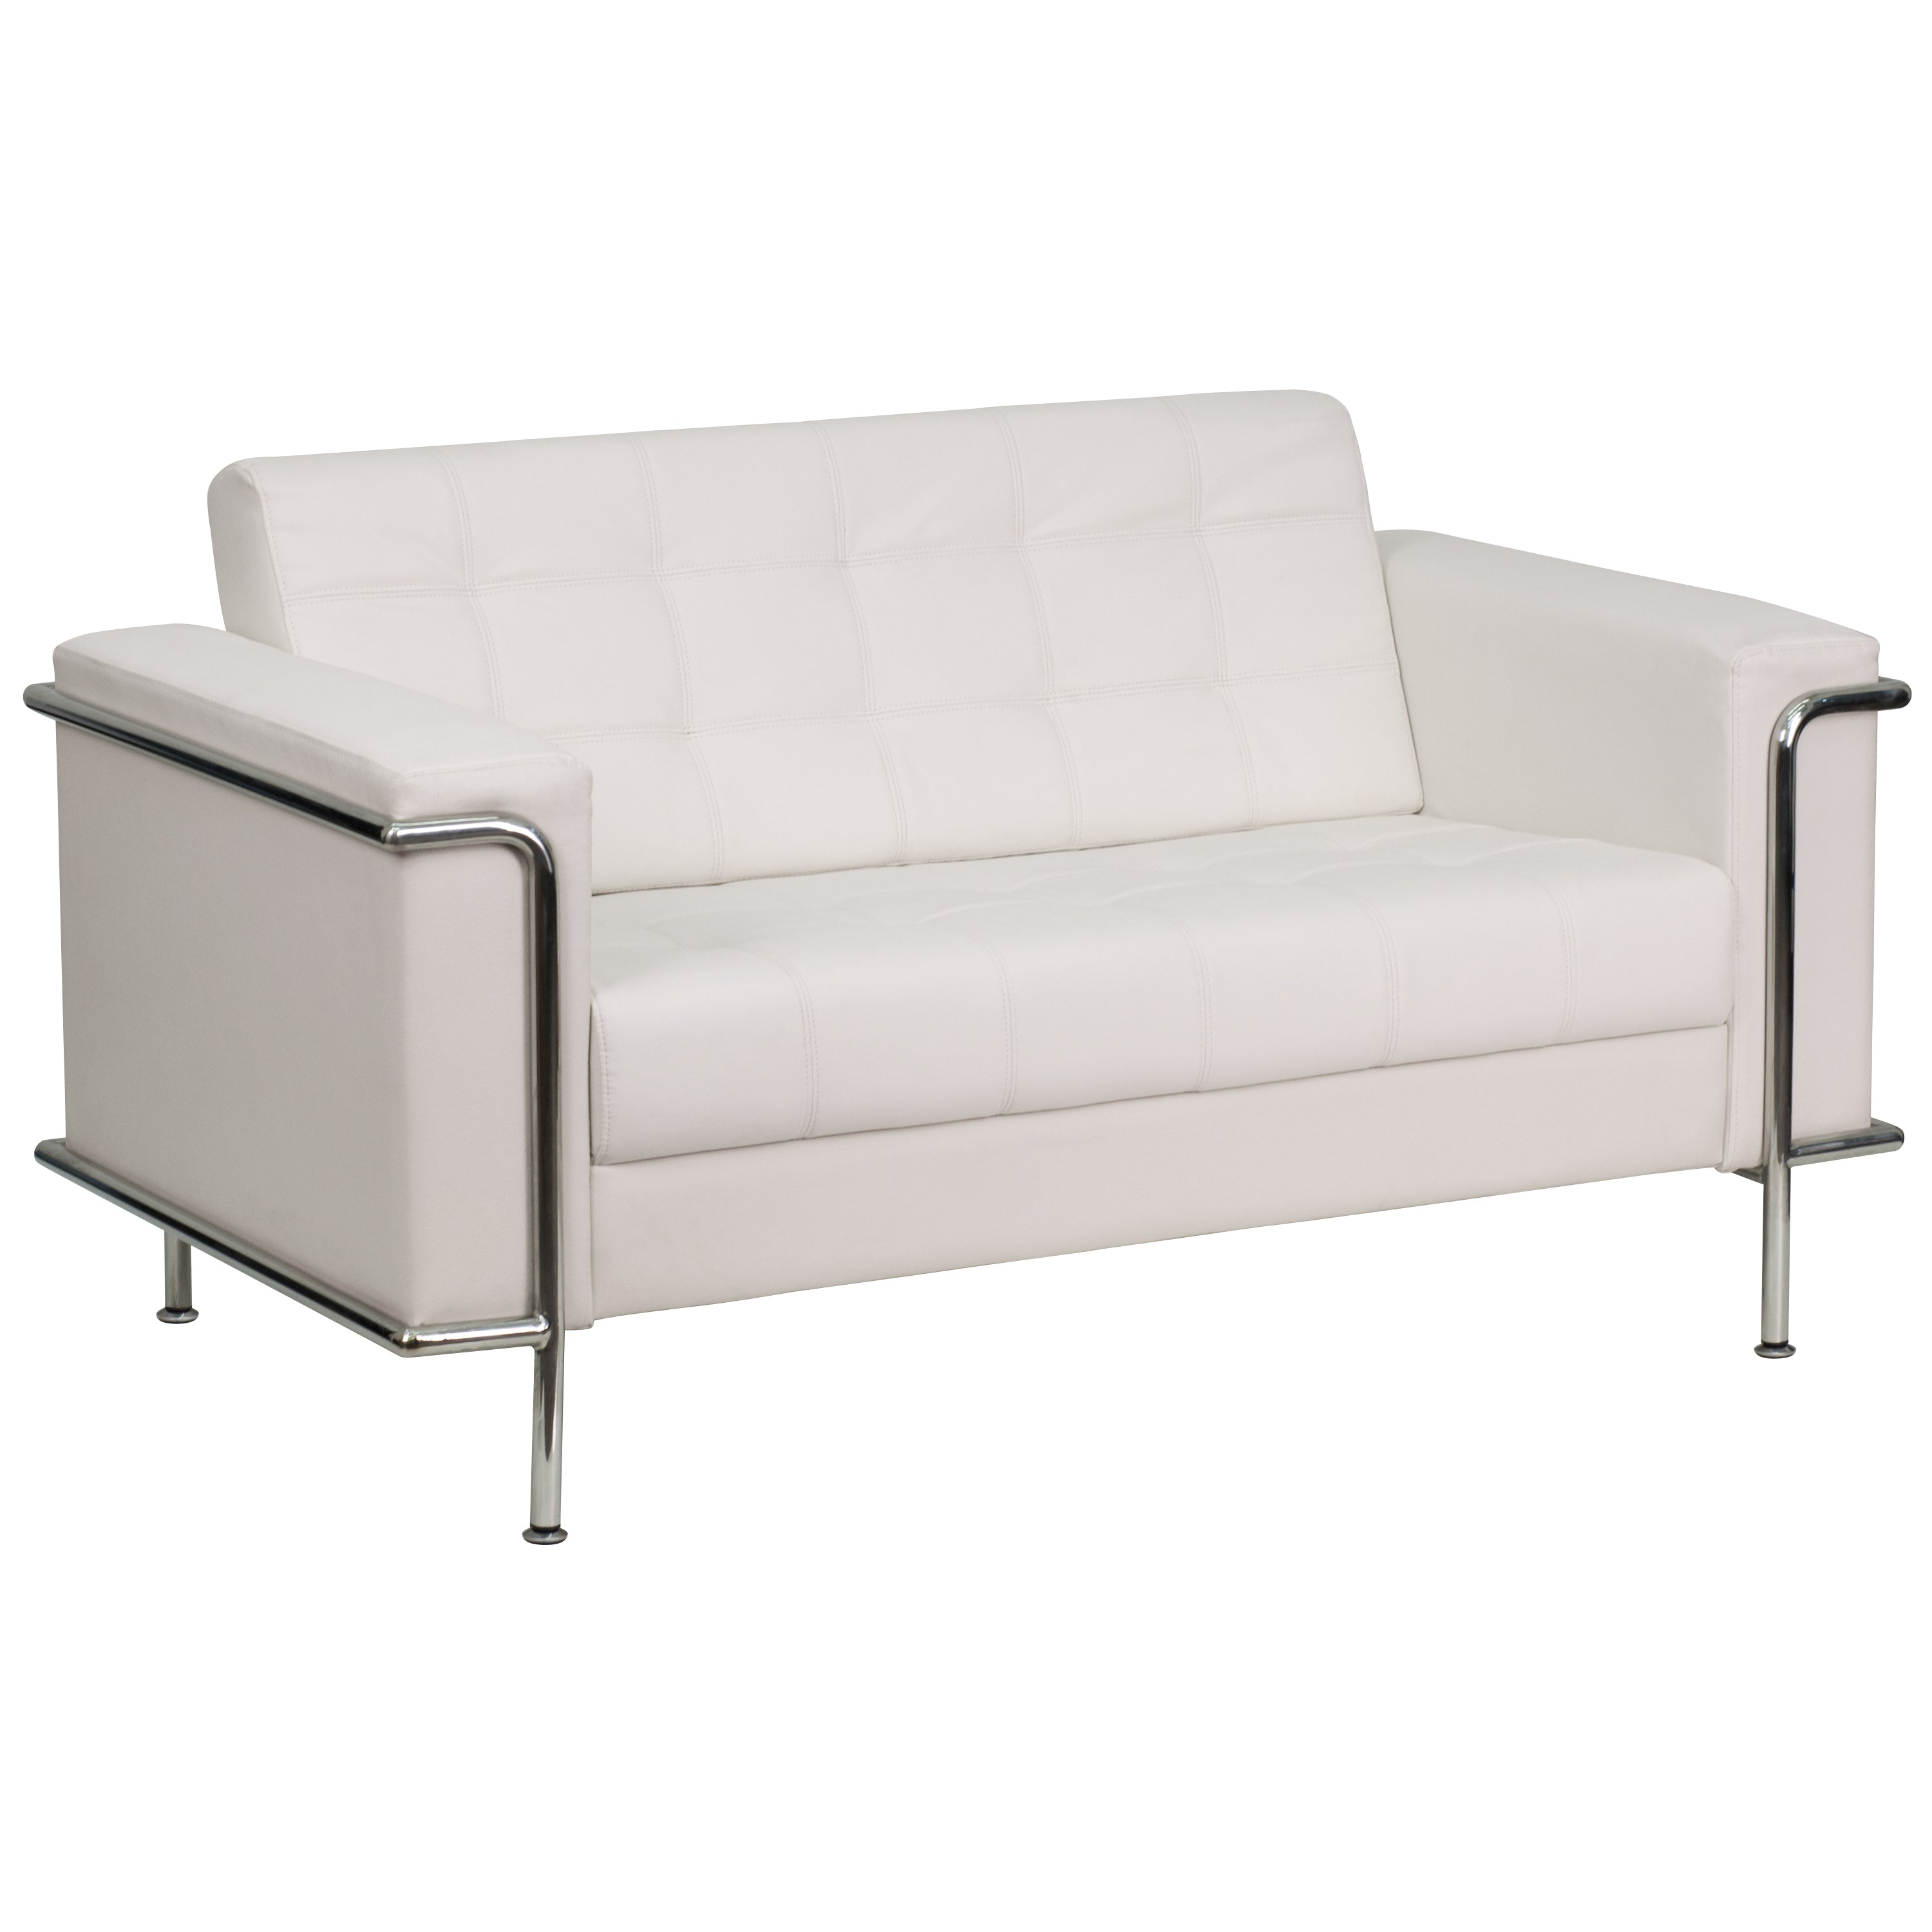 HERCULES Lesley Series Contemporary LeatherSoft Double Stitch Detail Loveseat with Encasing Frame-Reception Loveseat-Flash Furniture-Wall2Wall Furnishings